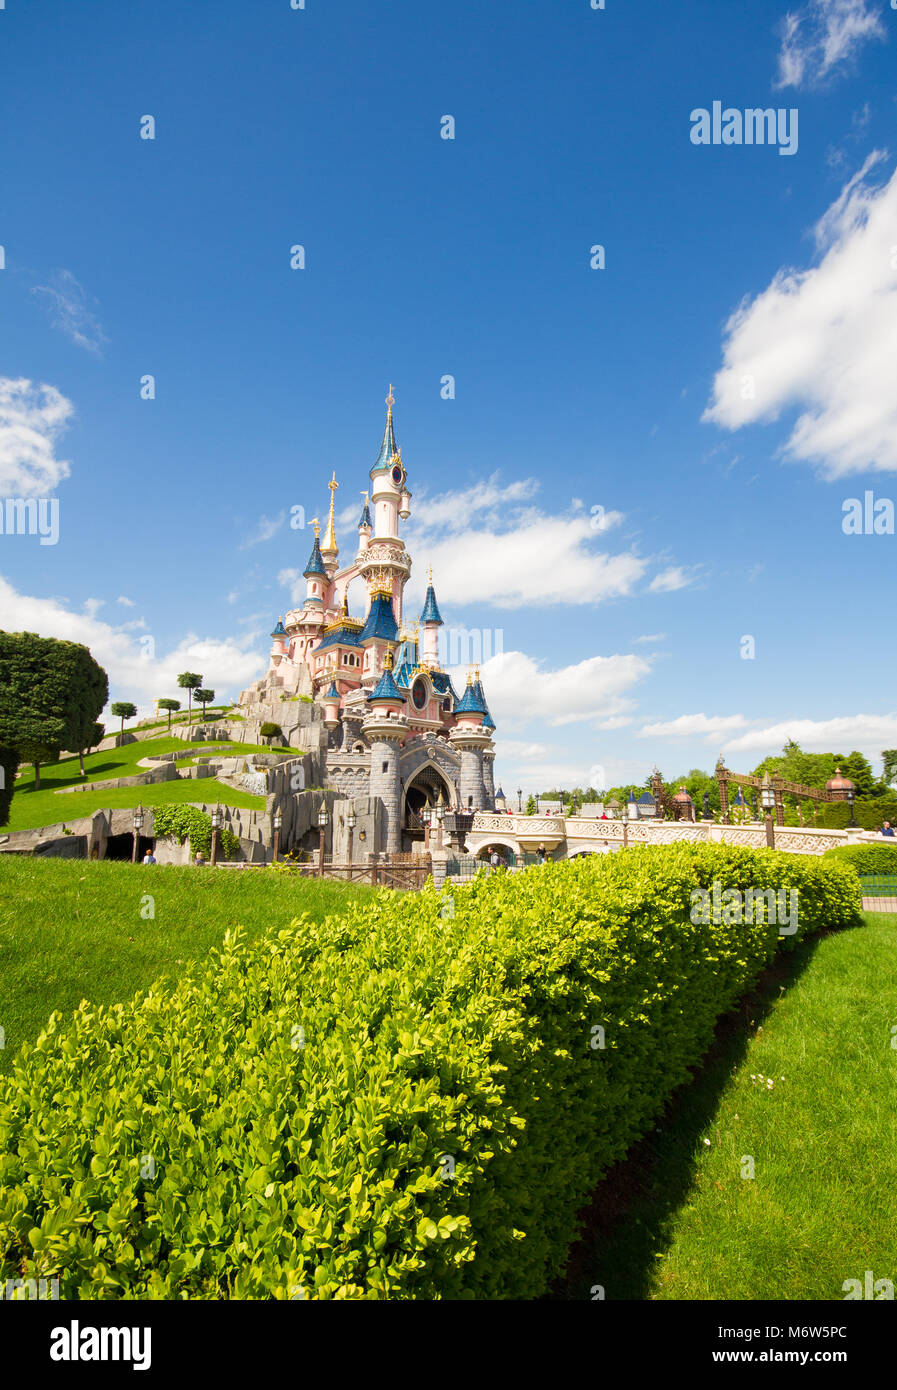 A colourful image in portrait orientation of Sleeping Beauty's Castle at Disneyland, Paris showing beautiful green gardens and blue sky. Stock Photo